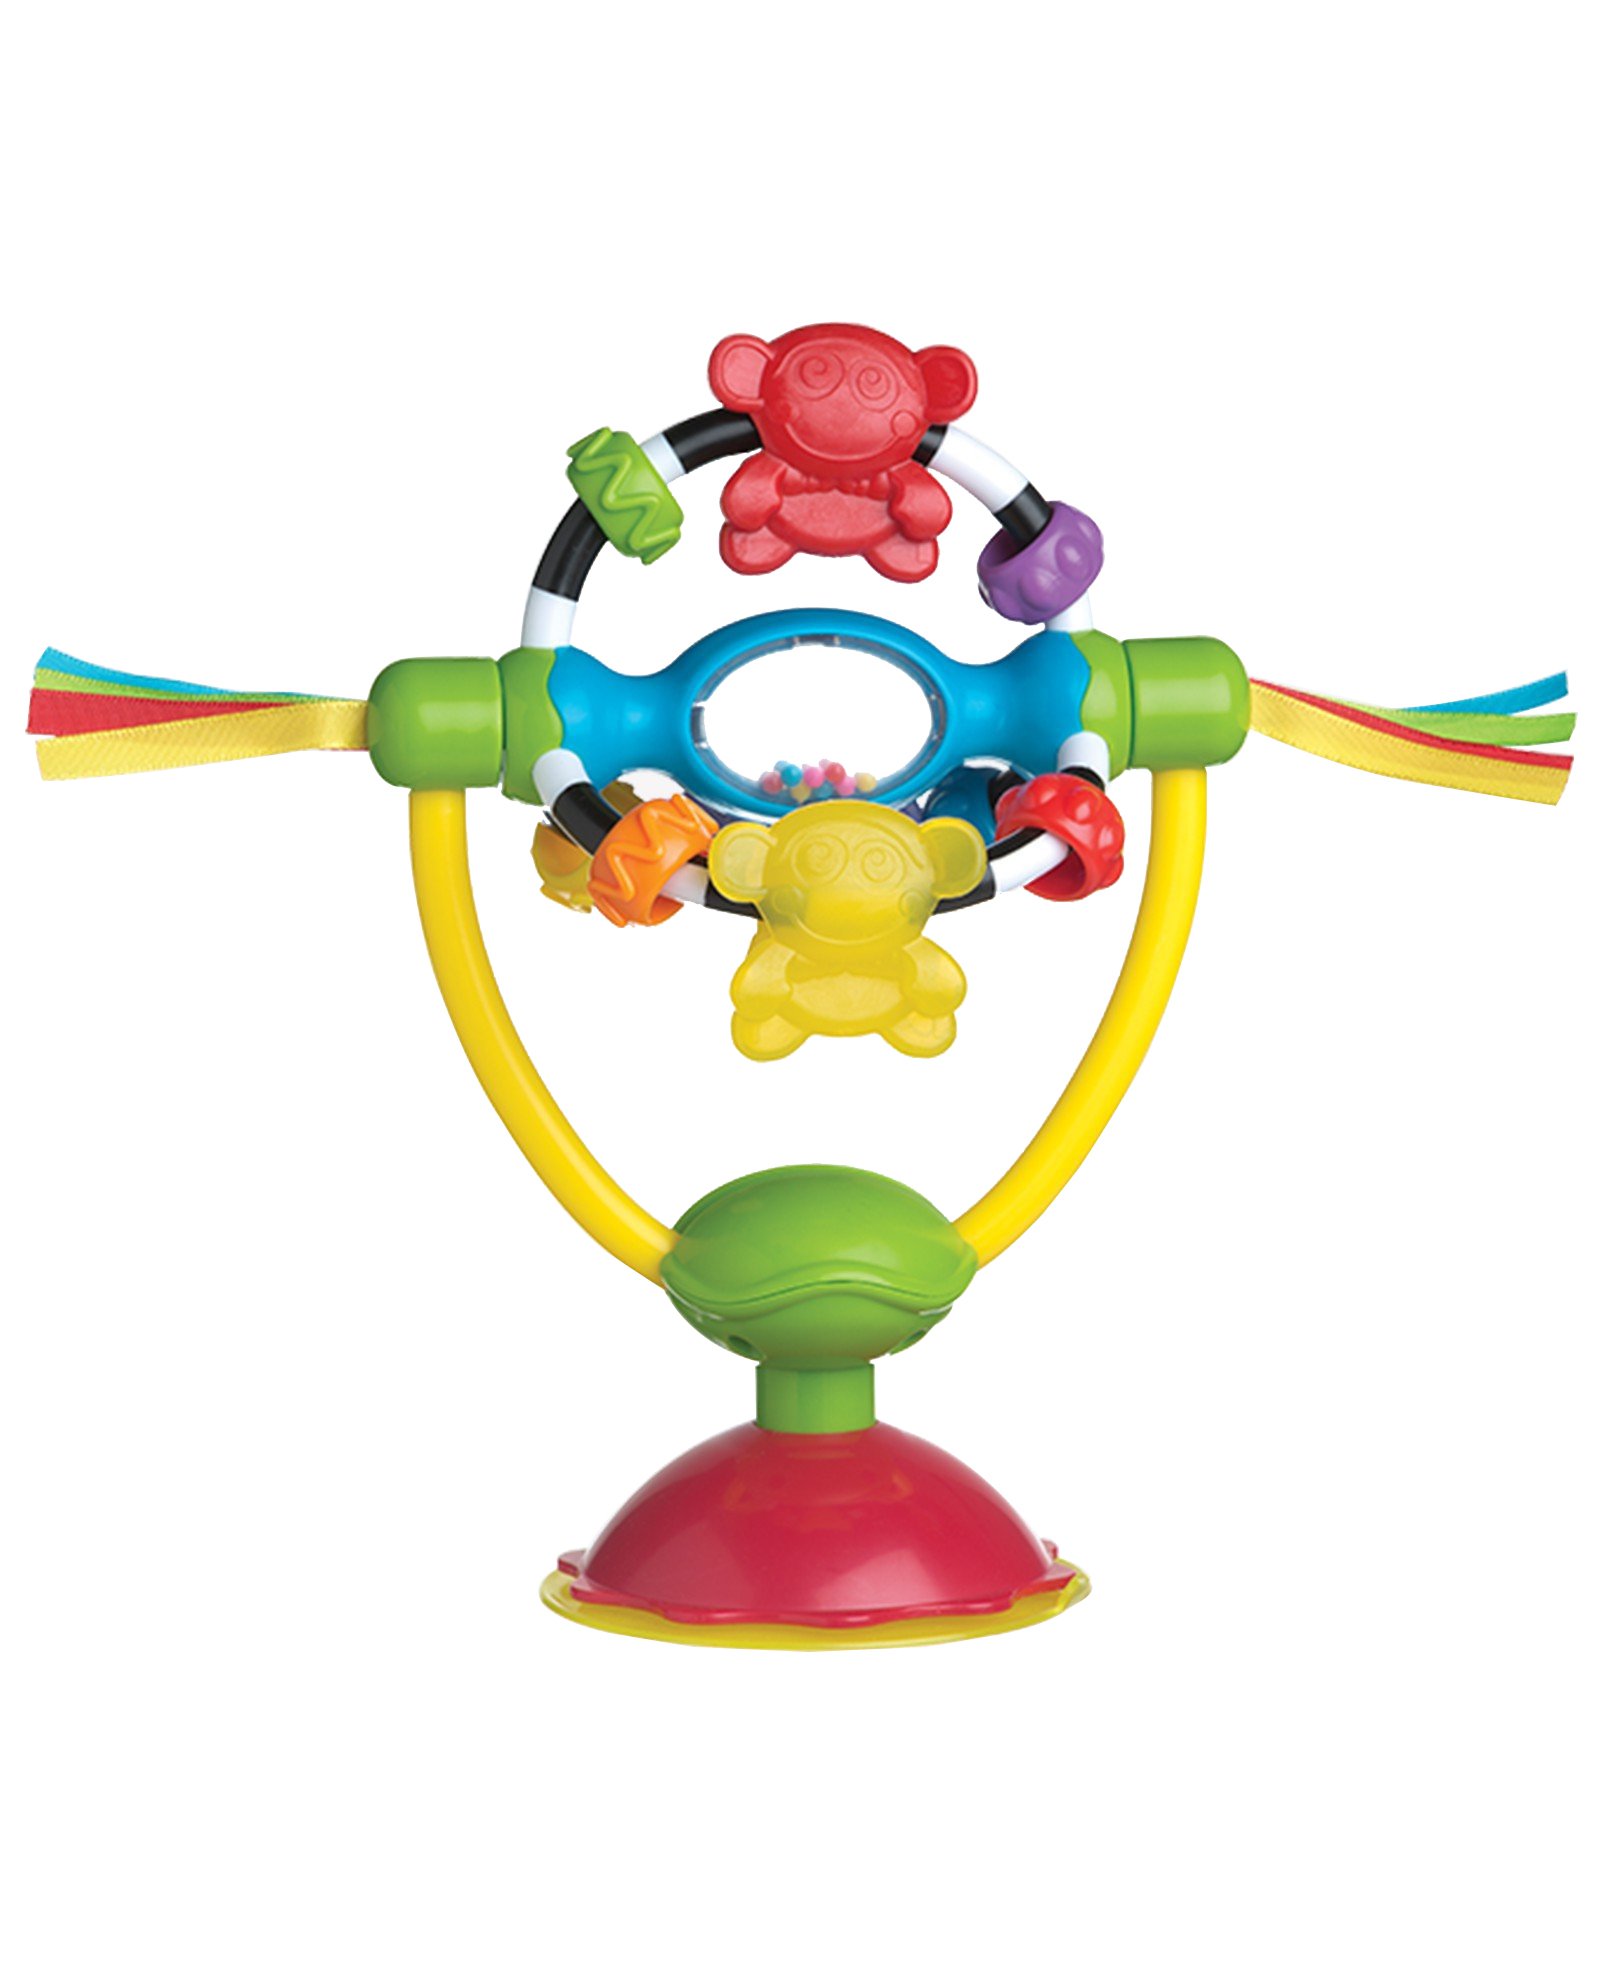 Playgro - High Chair Spinning Toy (1-0182212)